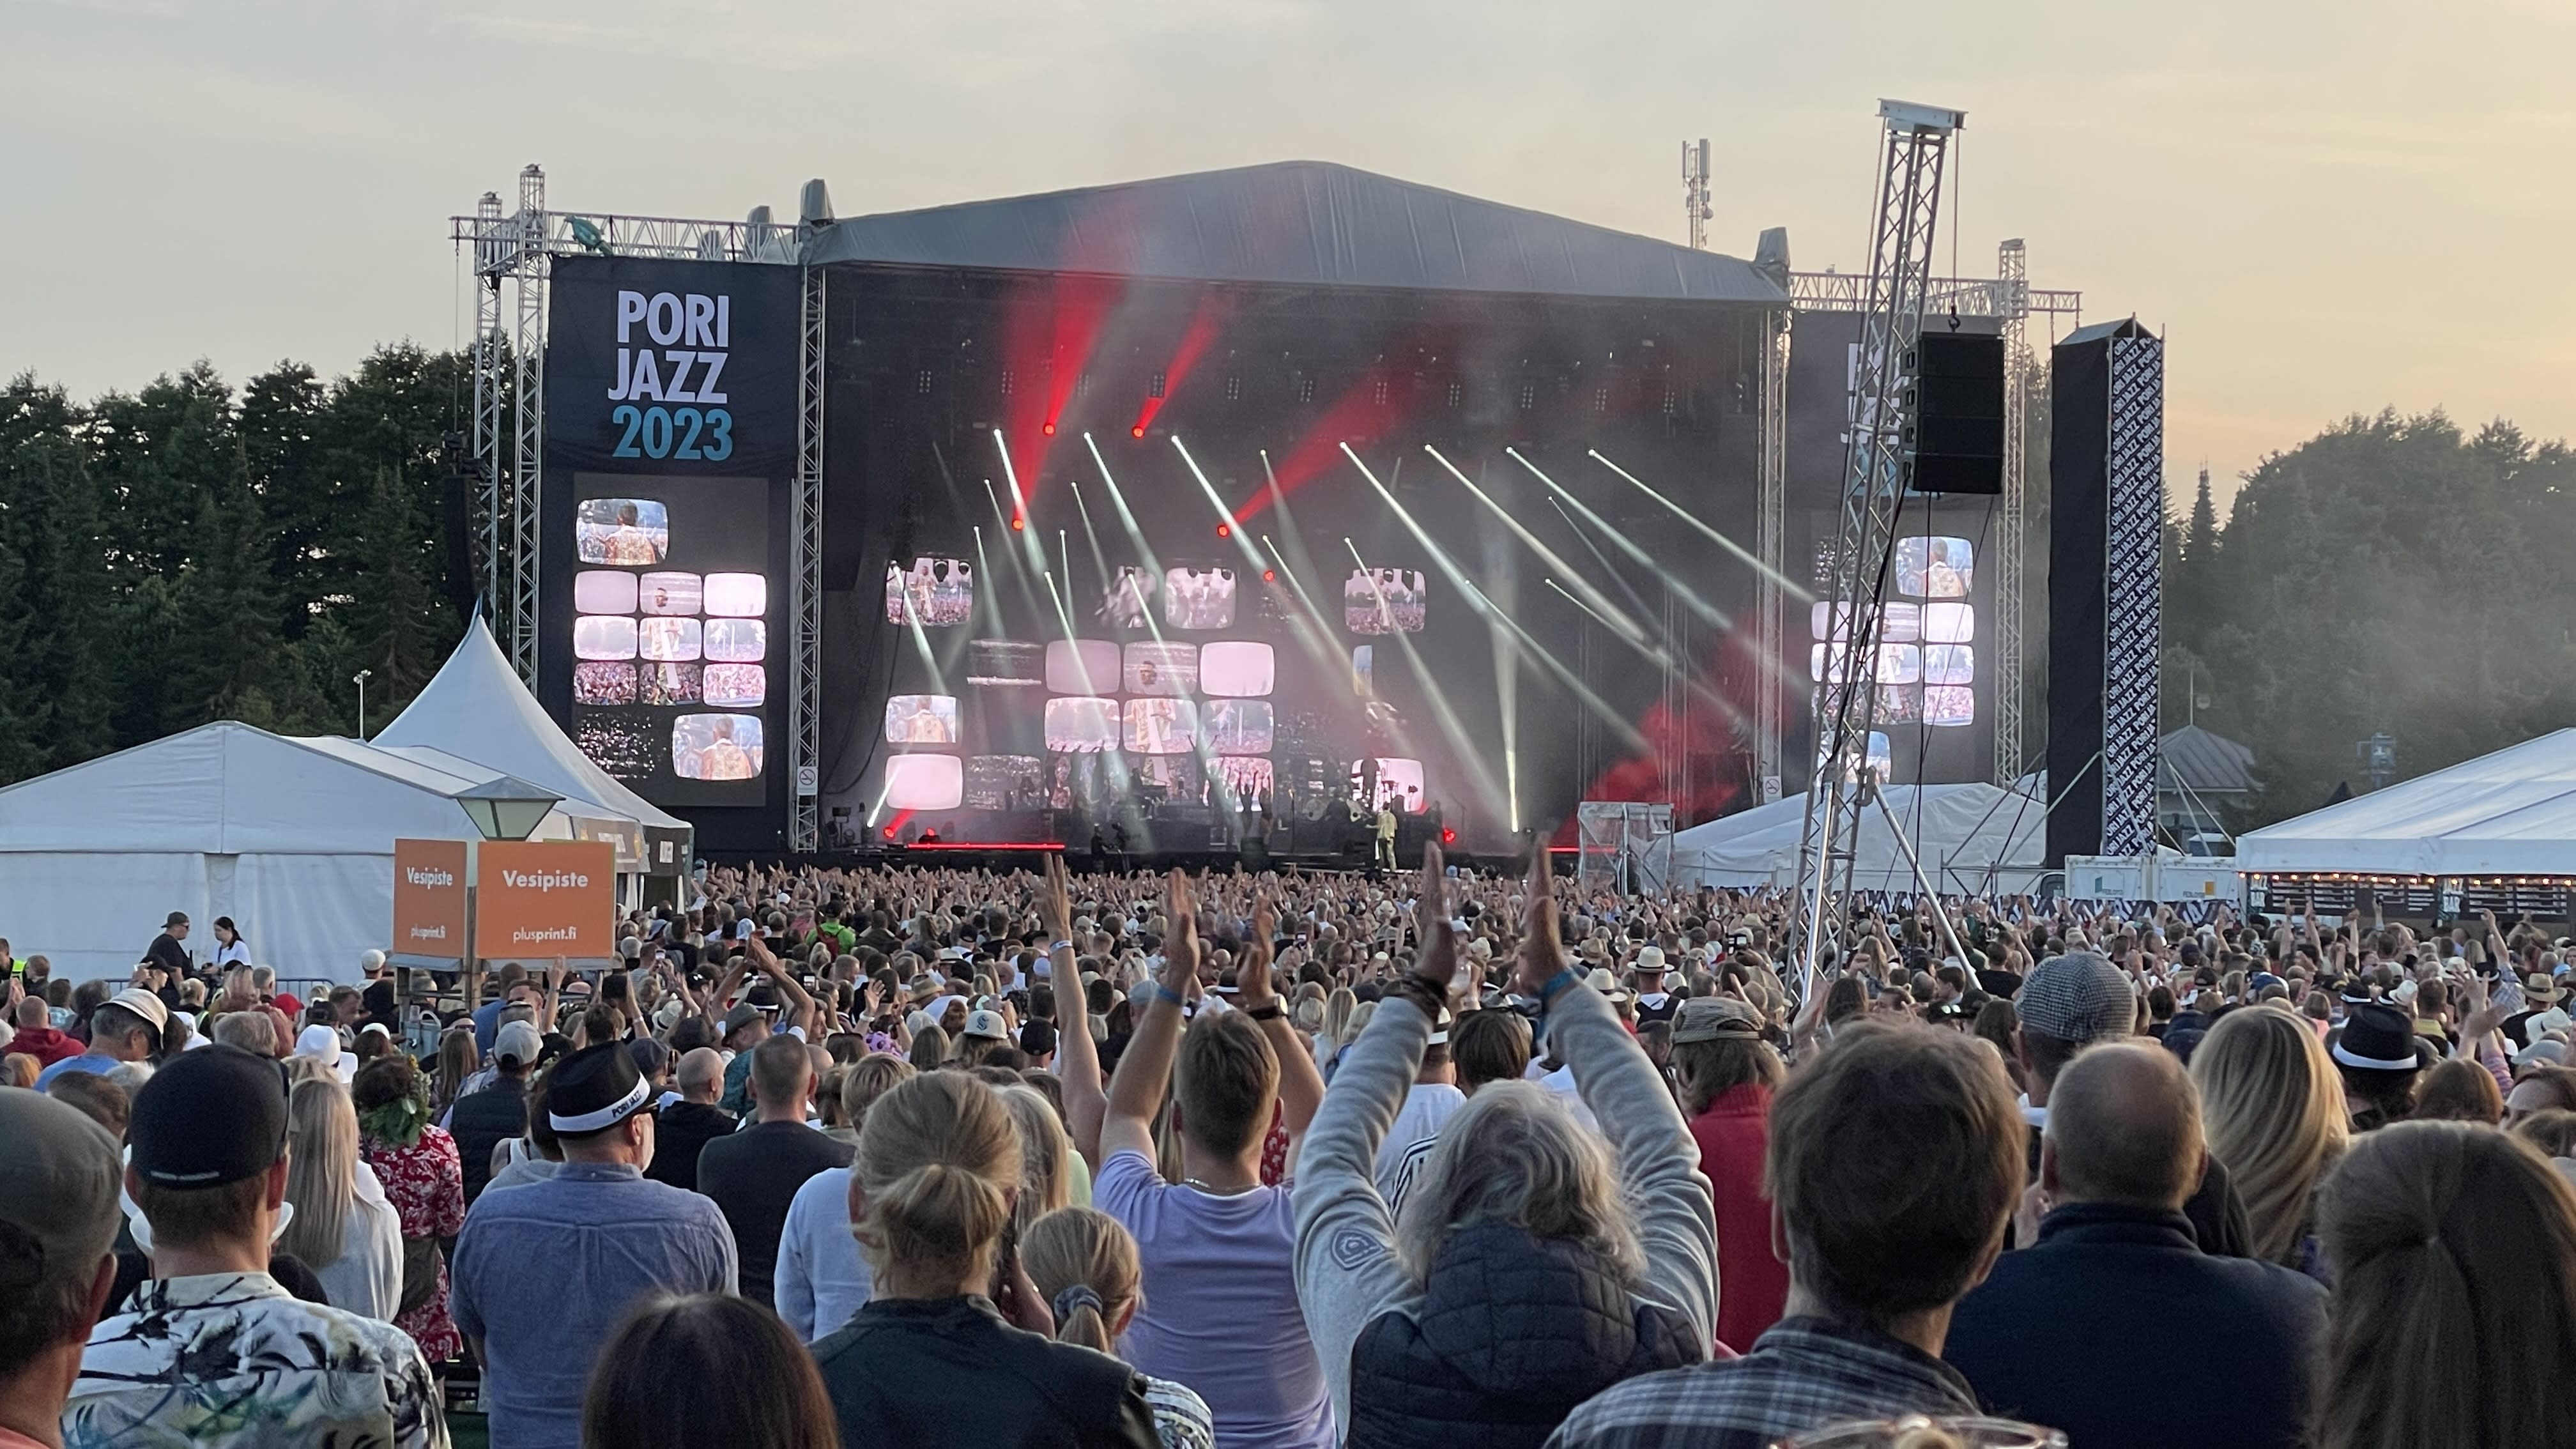 The police are investigating the misuse of funds from the Pori Jazz festival